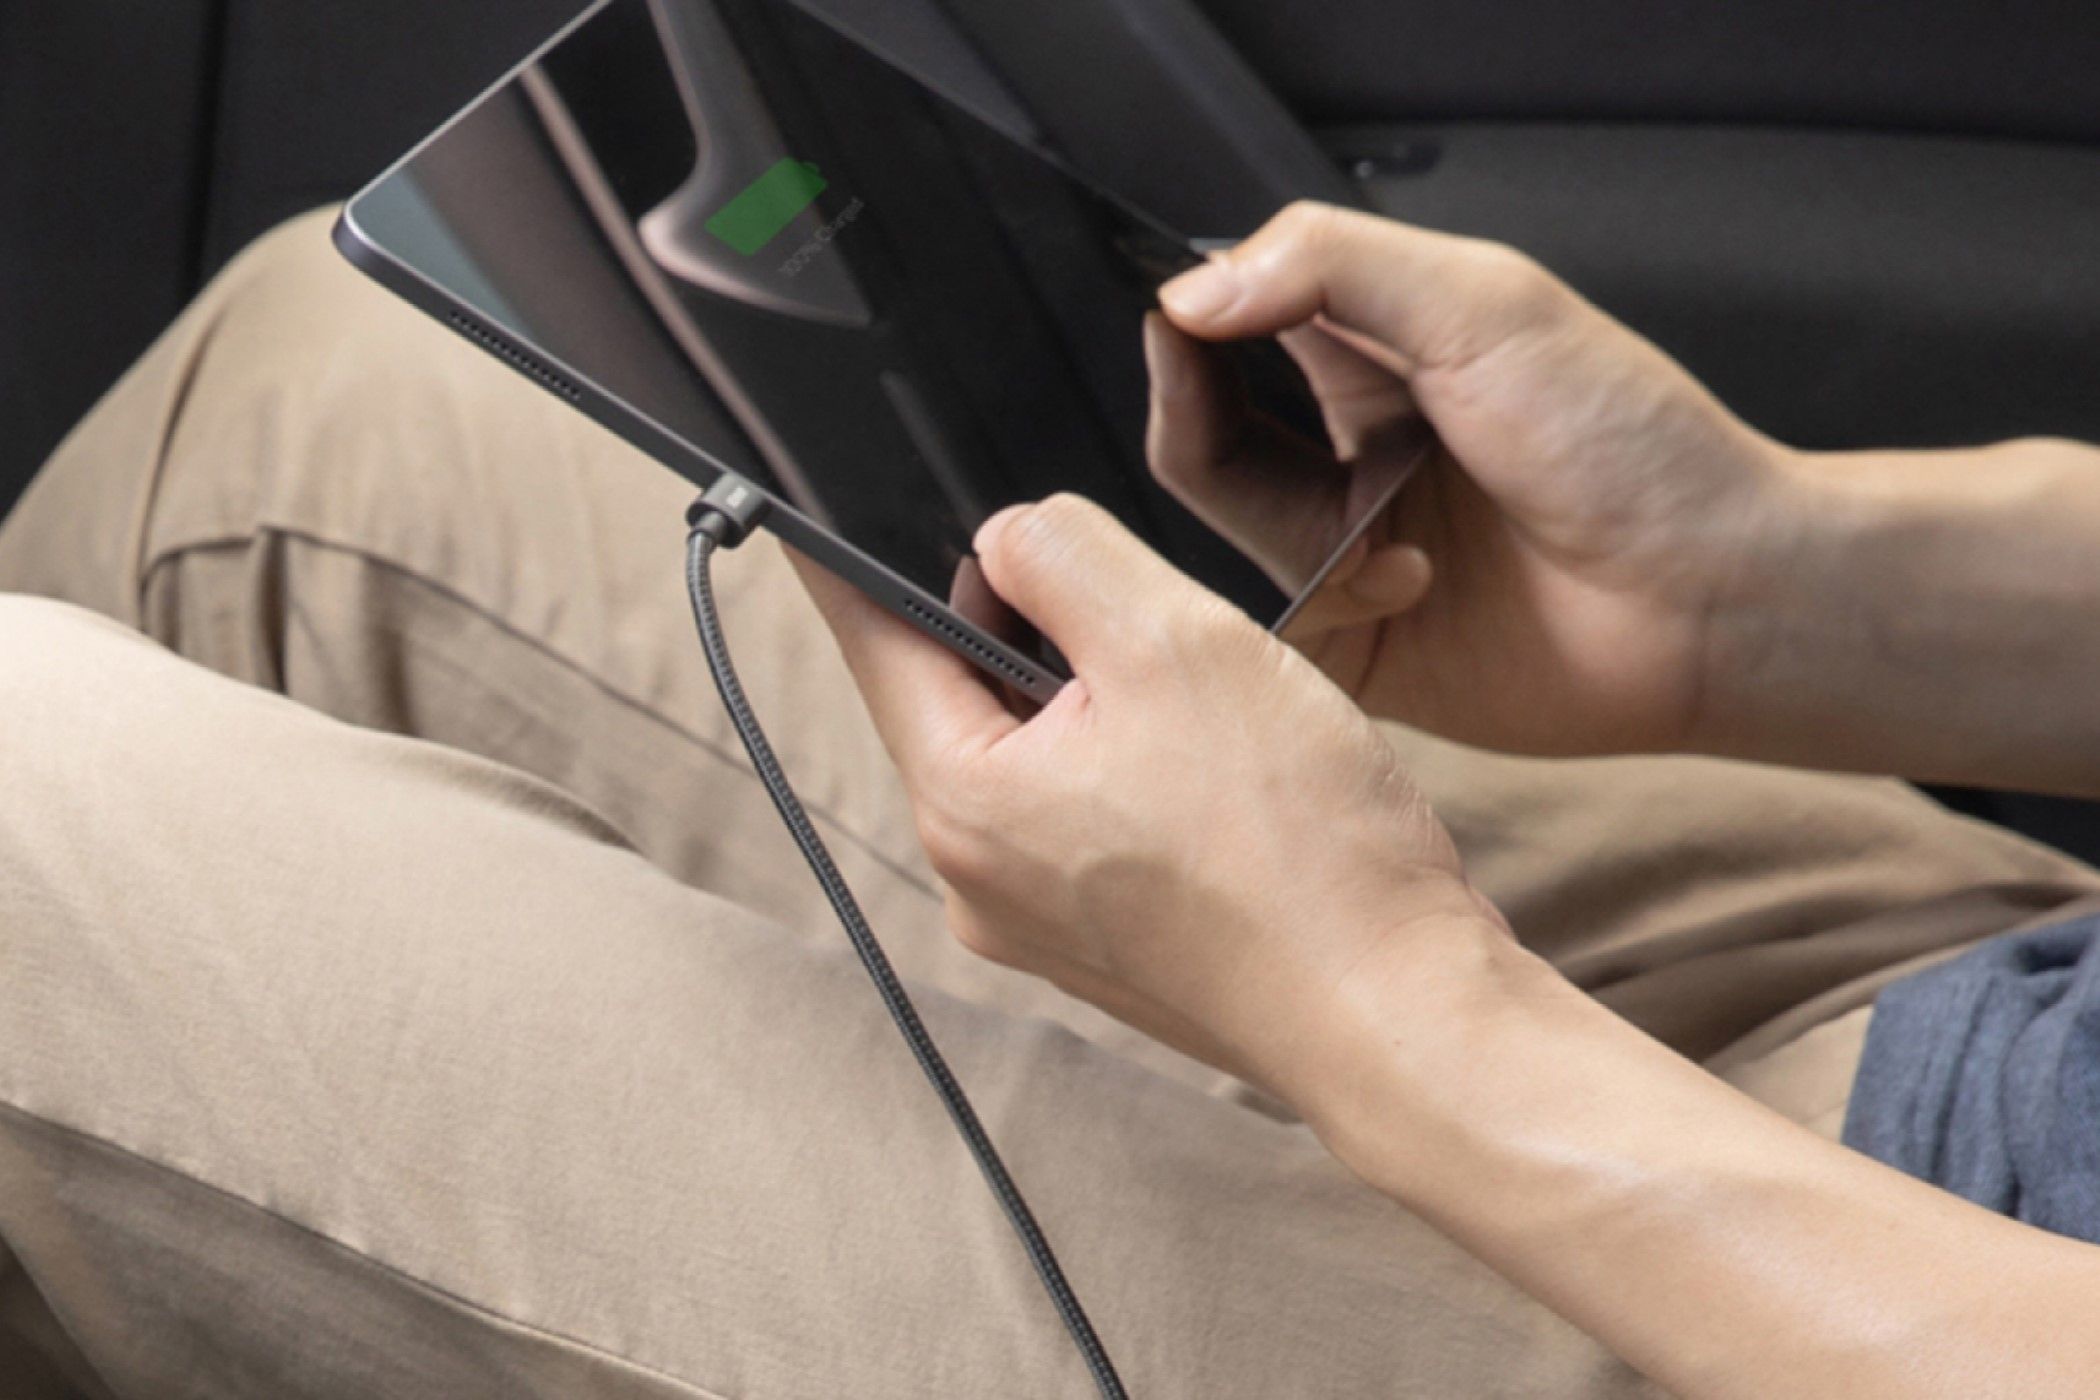 A person sitting in a car, using the Anker USB C to USB C Cable to charge their tablet